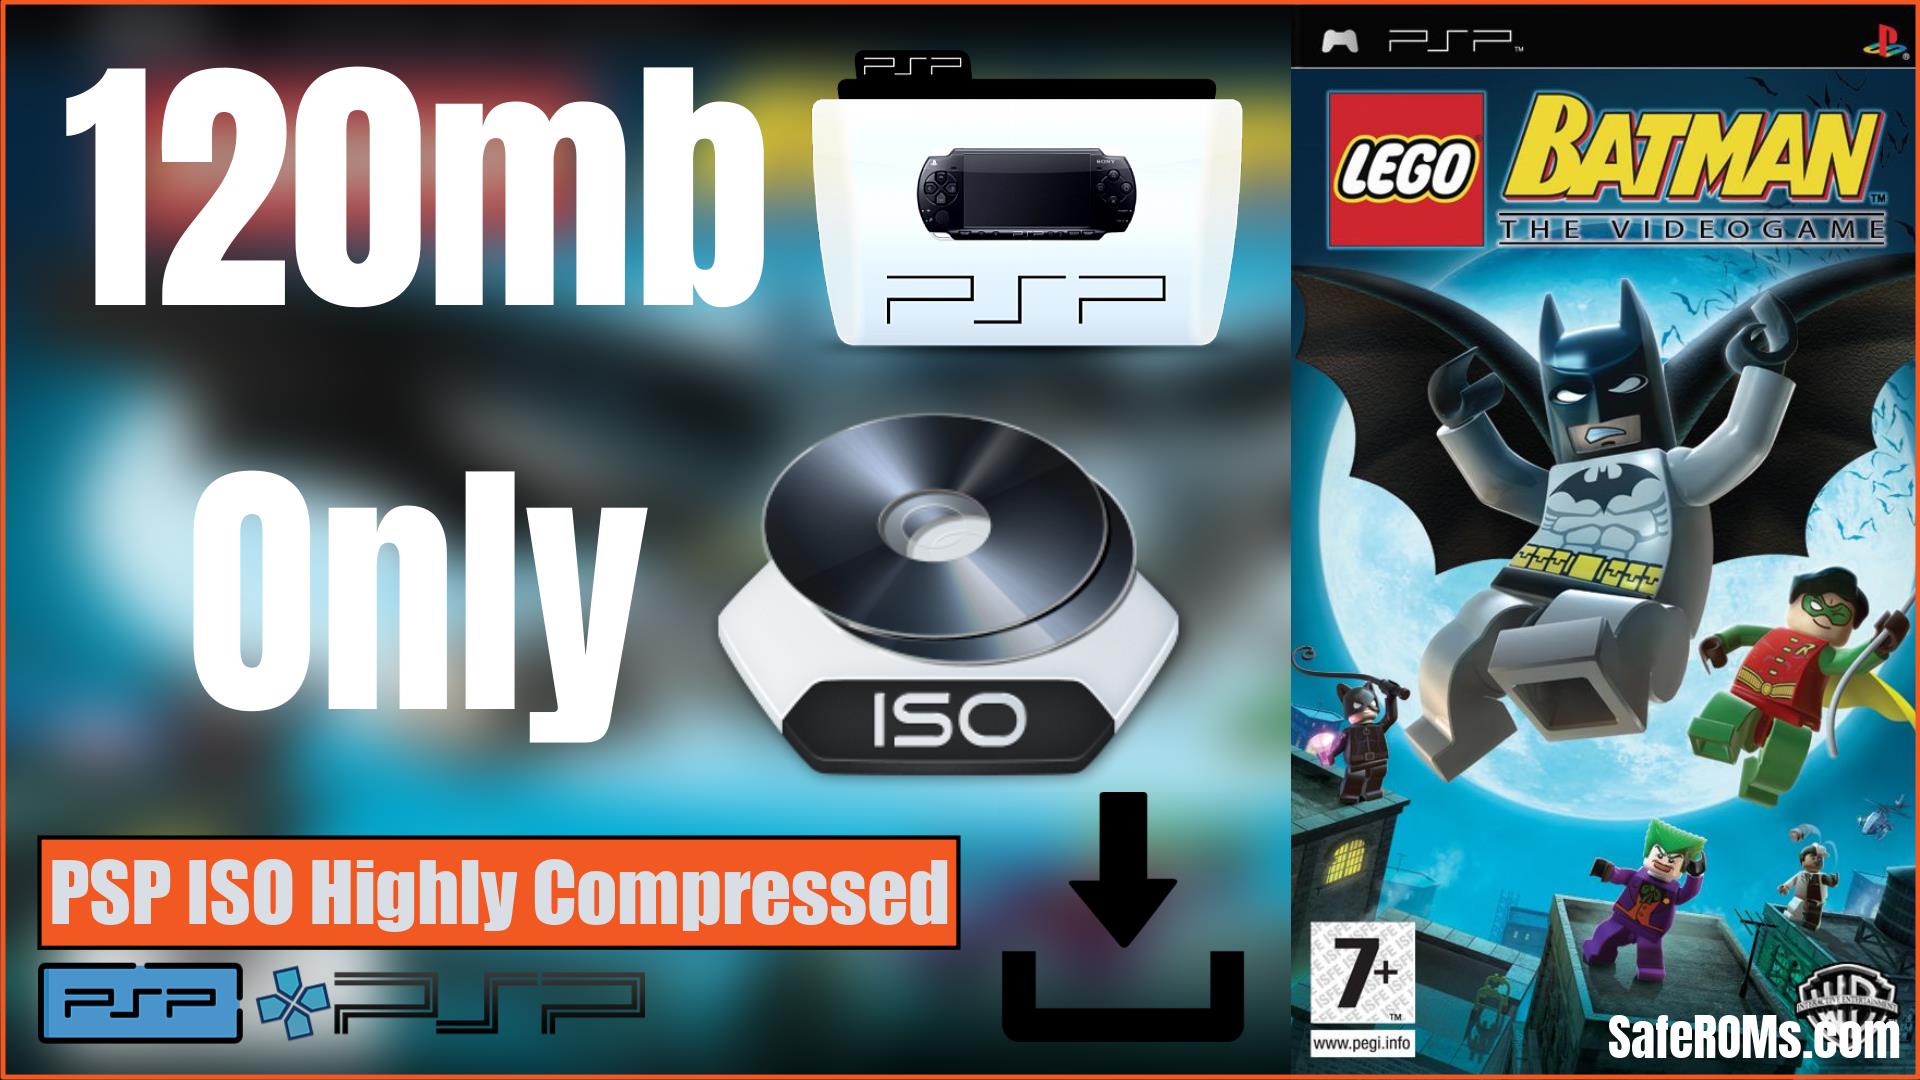 Lego Batman The Videogame PSP ISO Highly Compressed Download